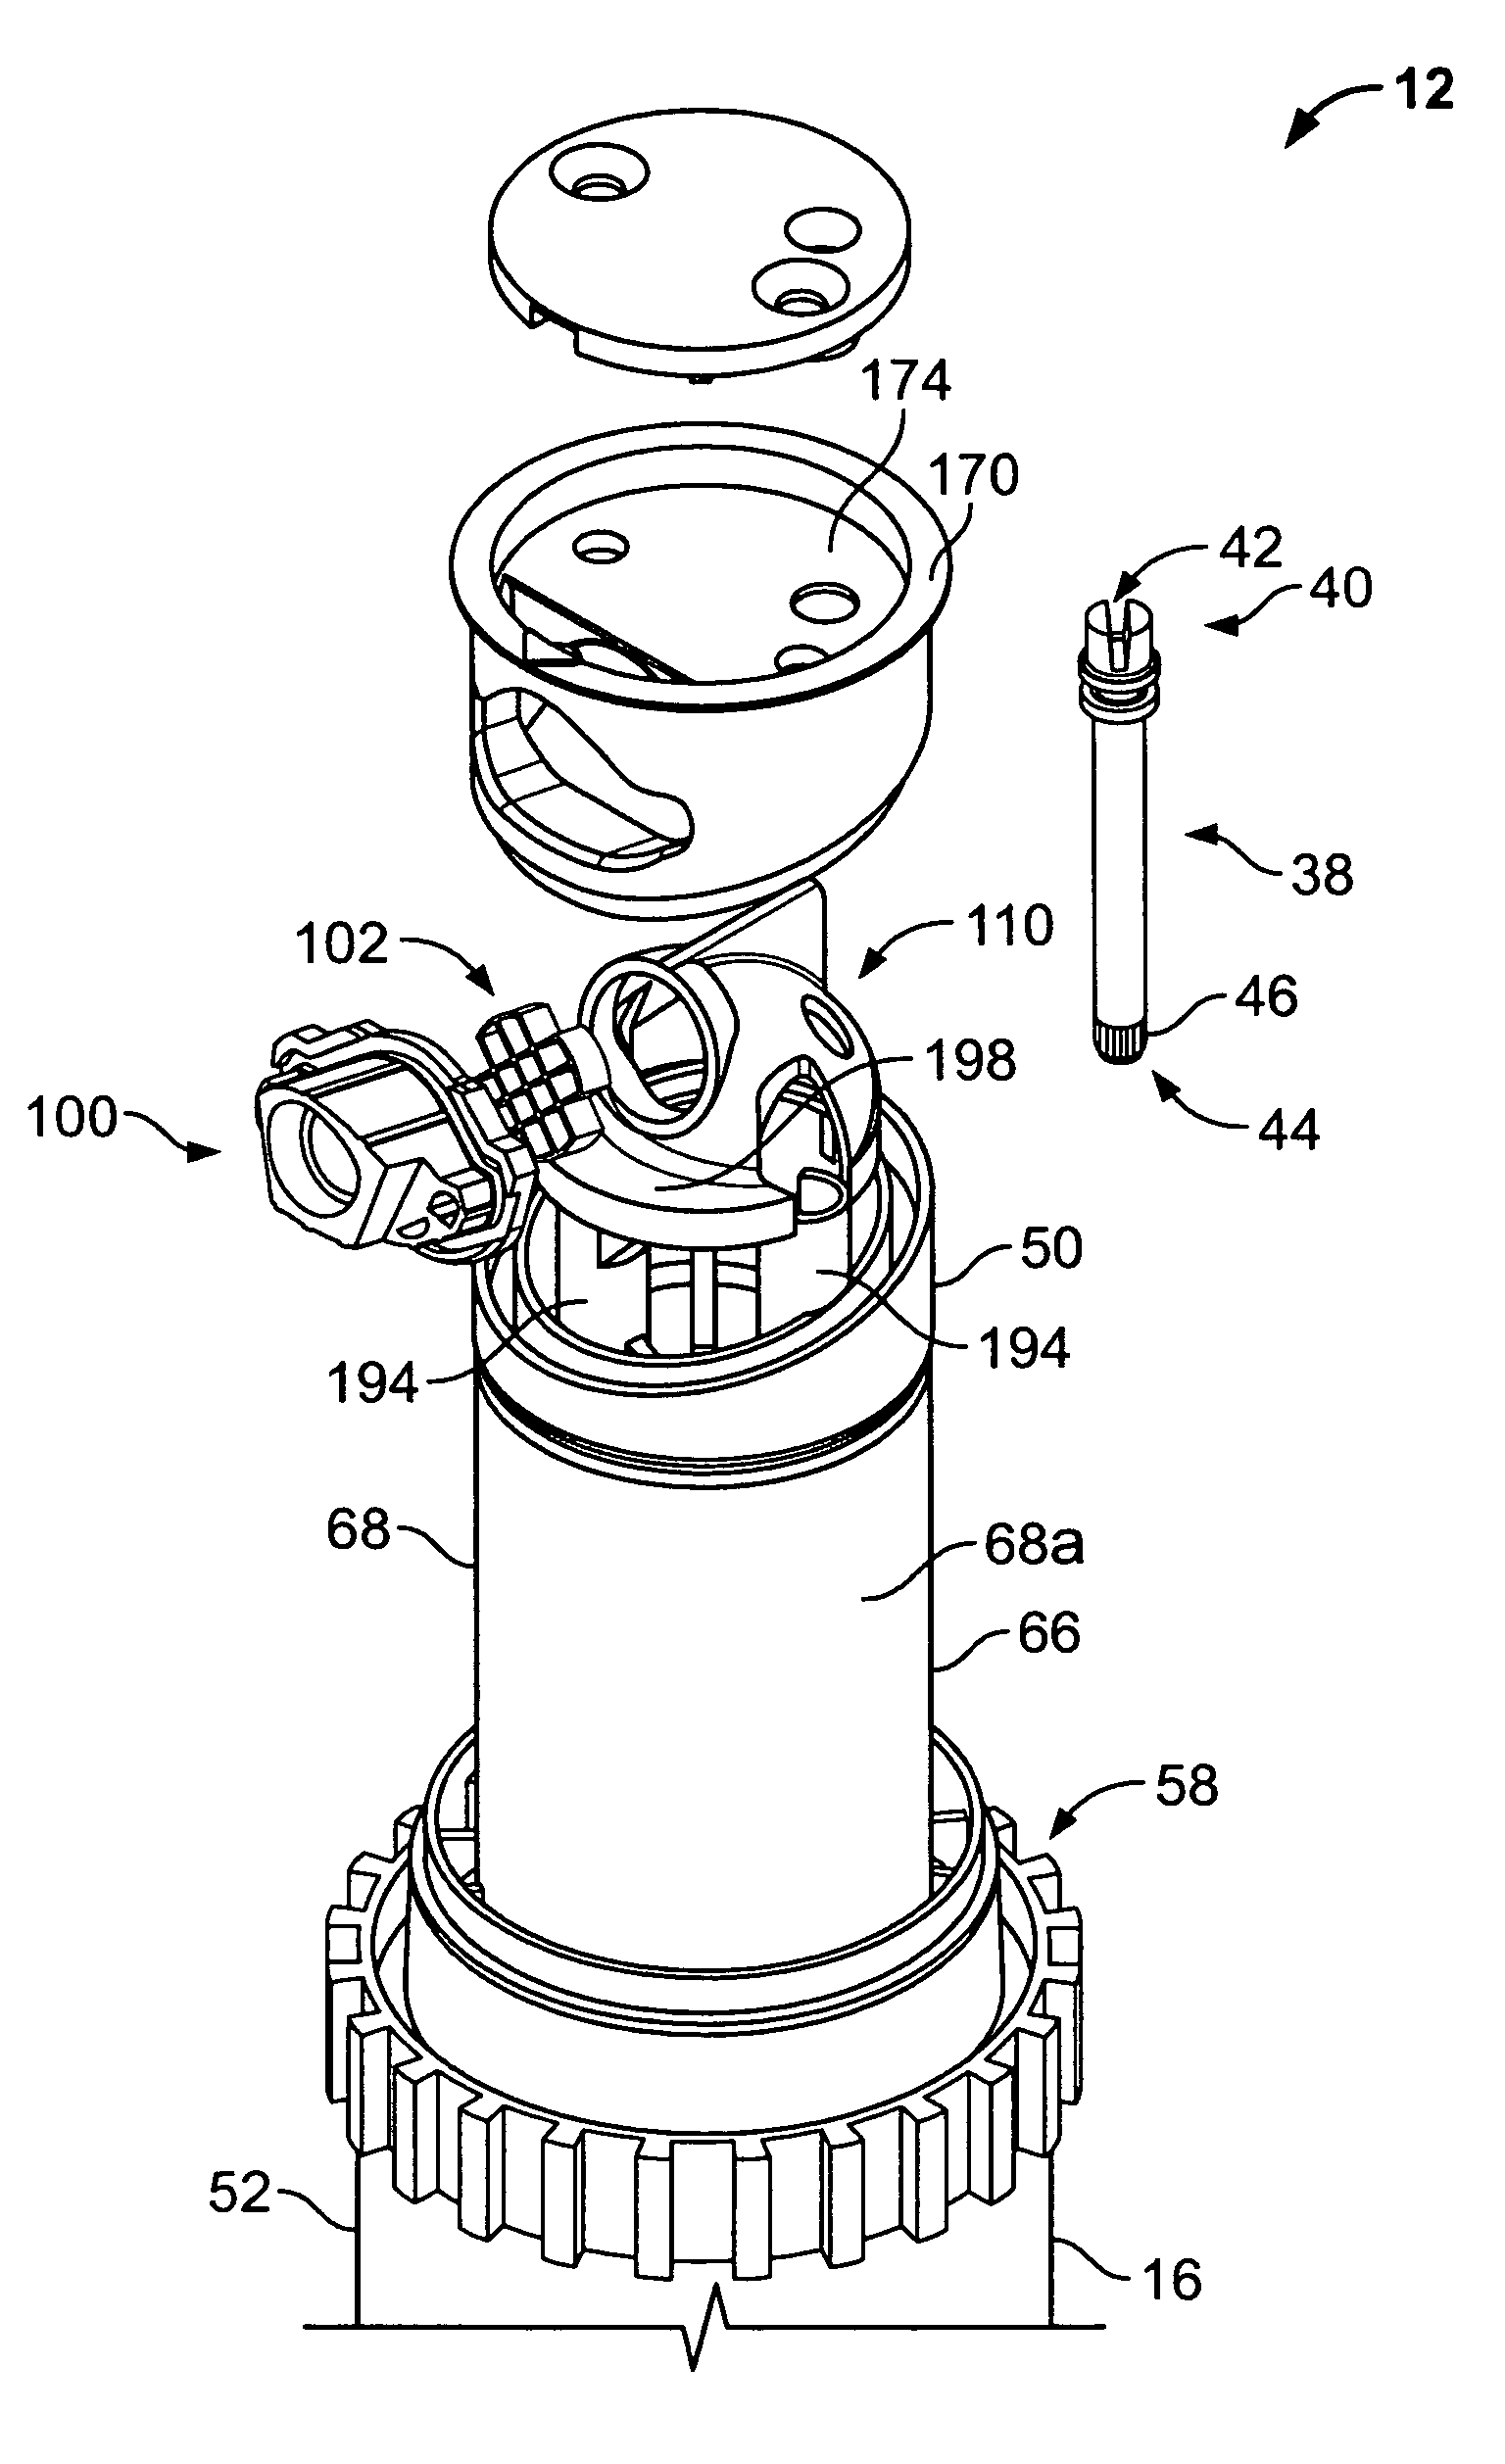 Sprinkler nozzle and flow channel